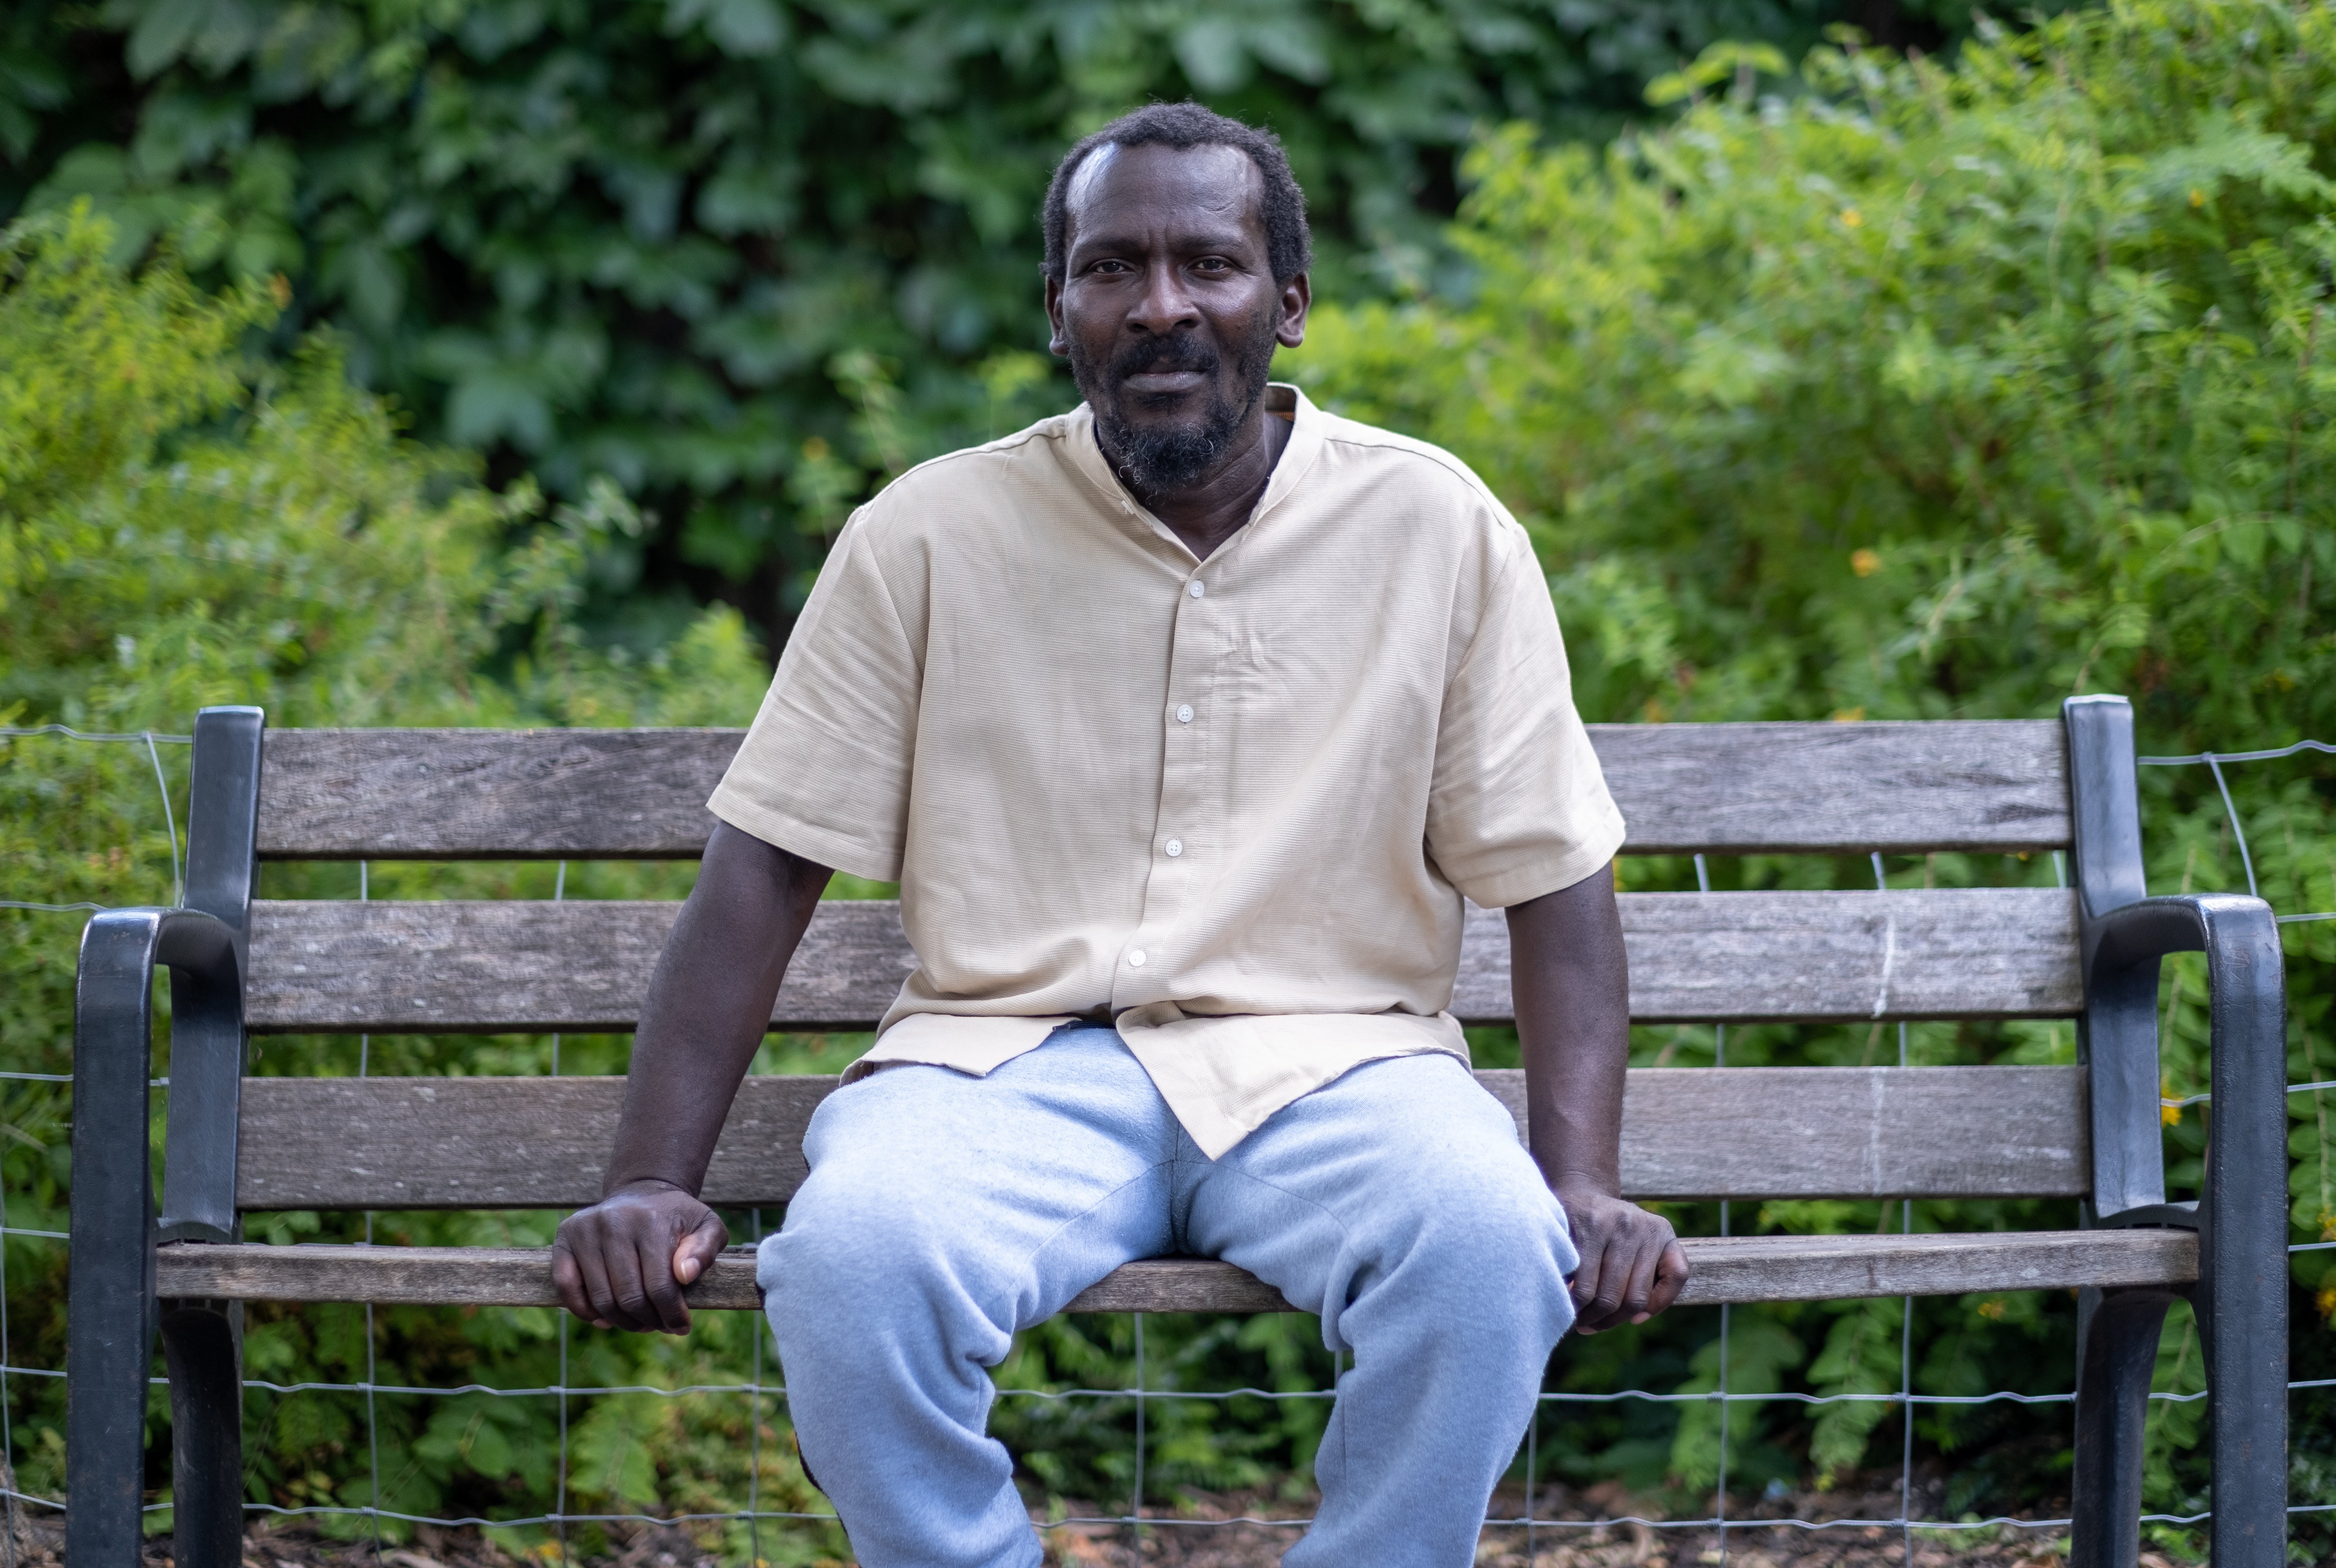 Fitzroy Maynard, who ended up homeless because he could not prove his right to work in the UK has described his lengthy experience with the Windrush compensation scheme as ‘worse than hell’